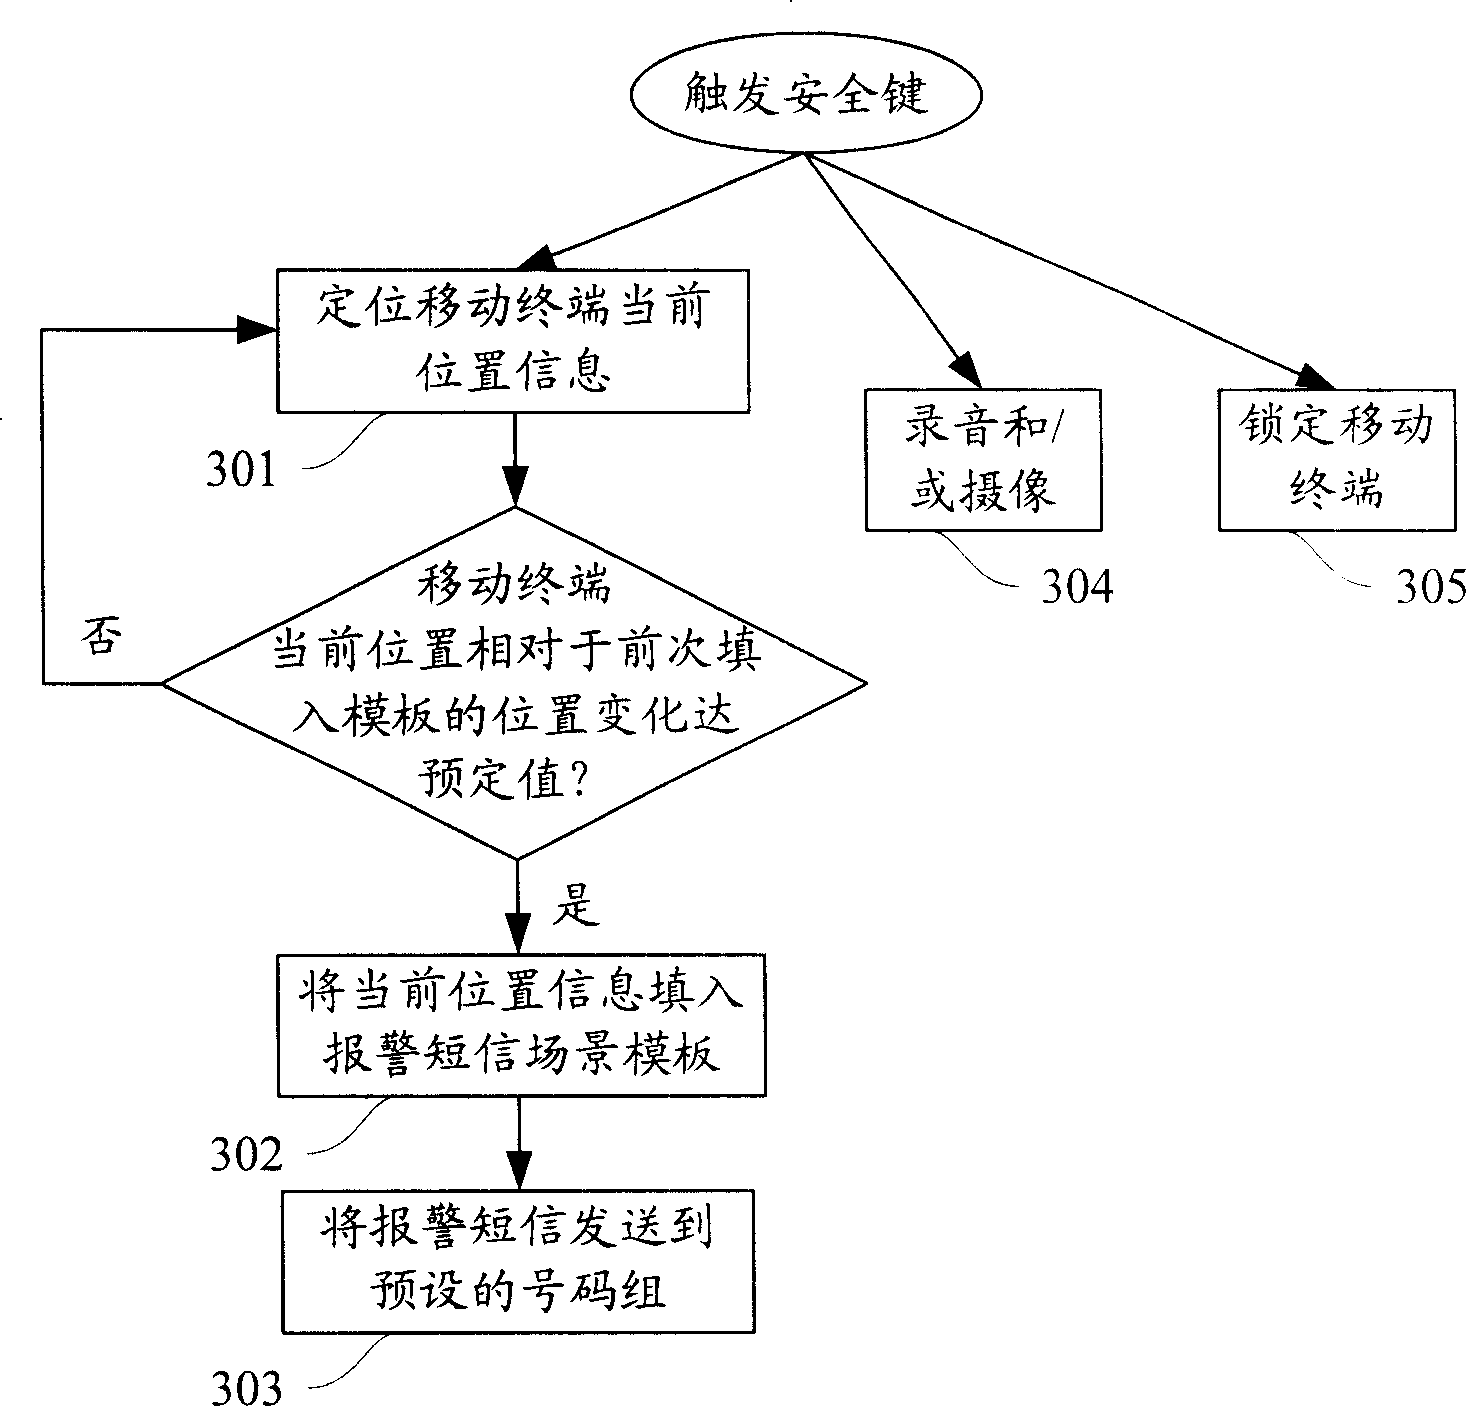 Method and device for implementing automatic alarm from mobile terminal